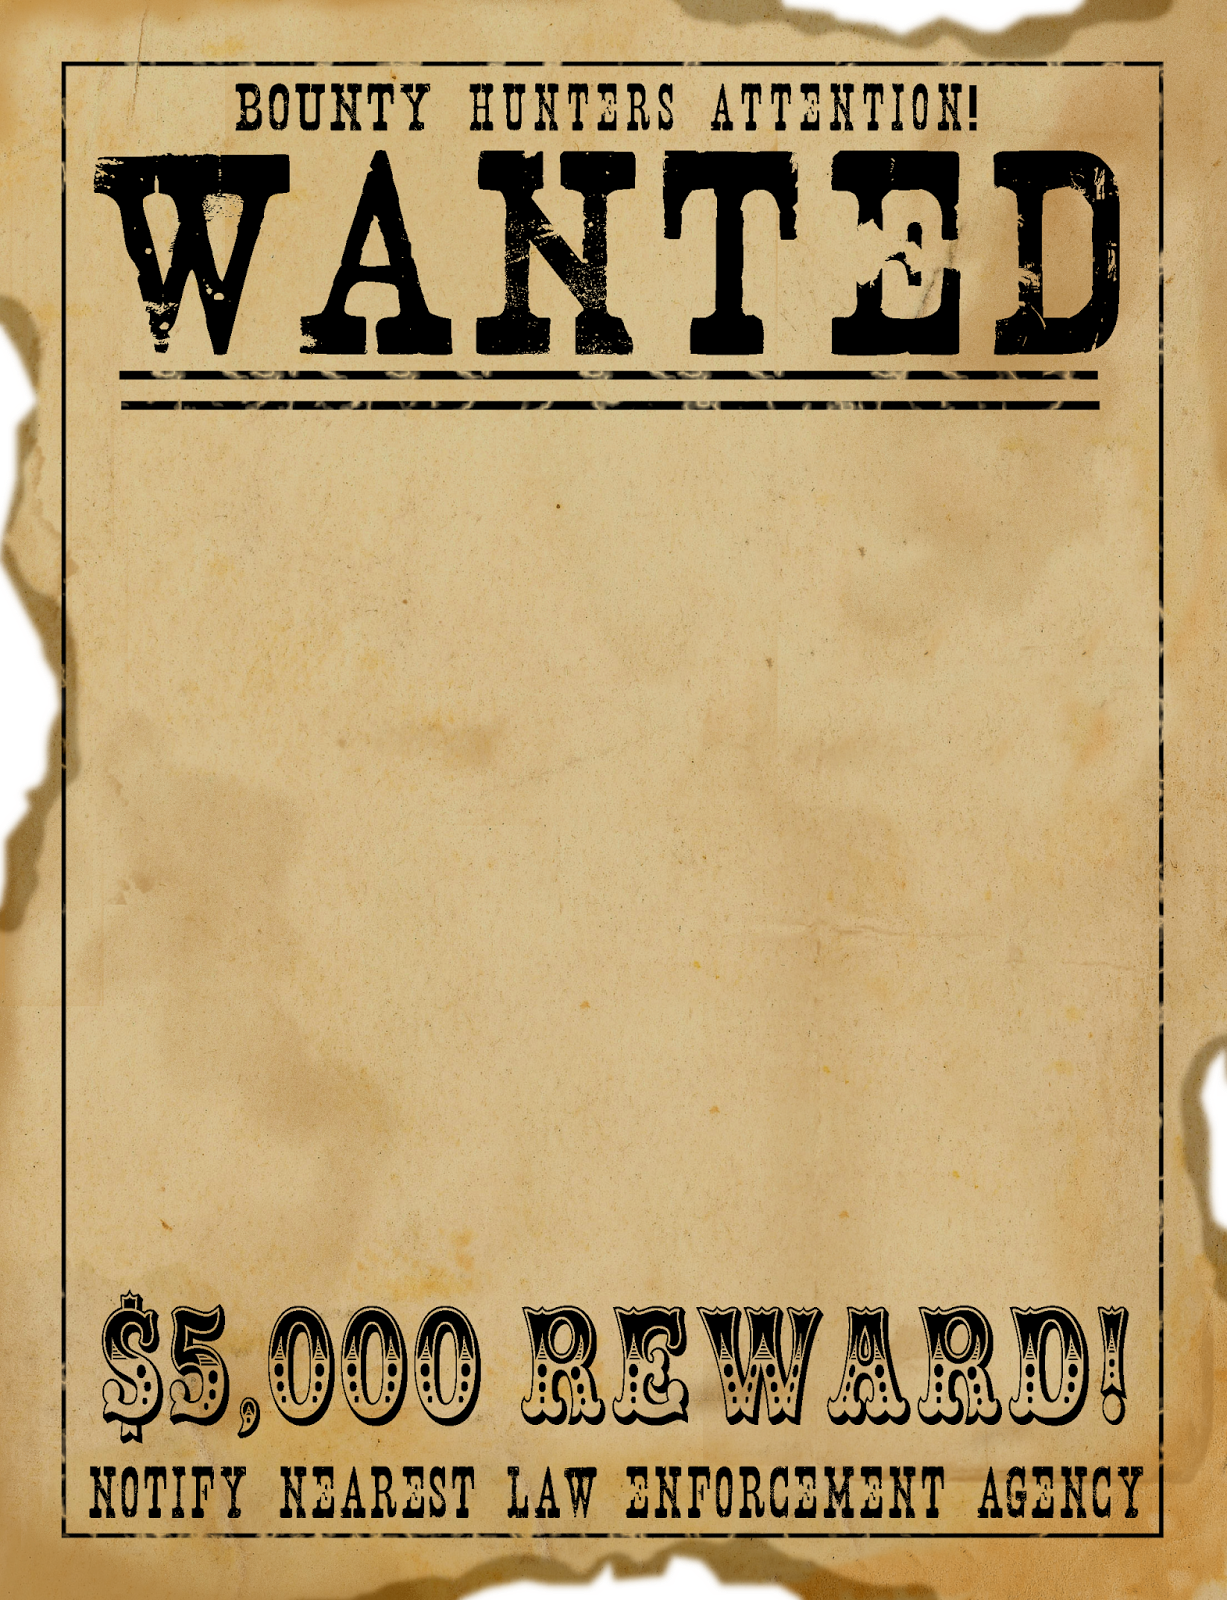 Free Printable Wanted Posters Templates